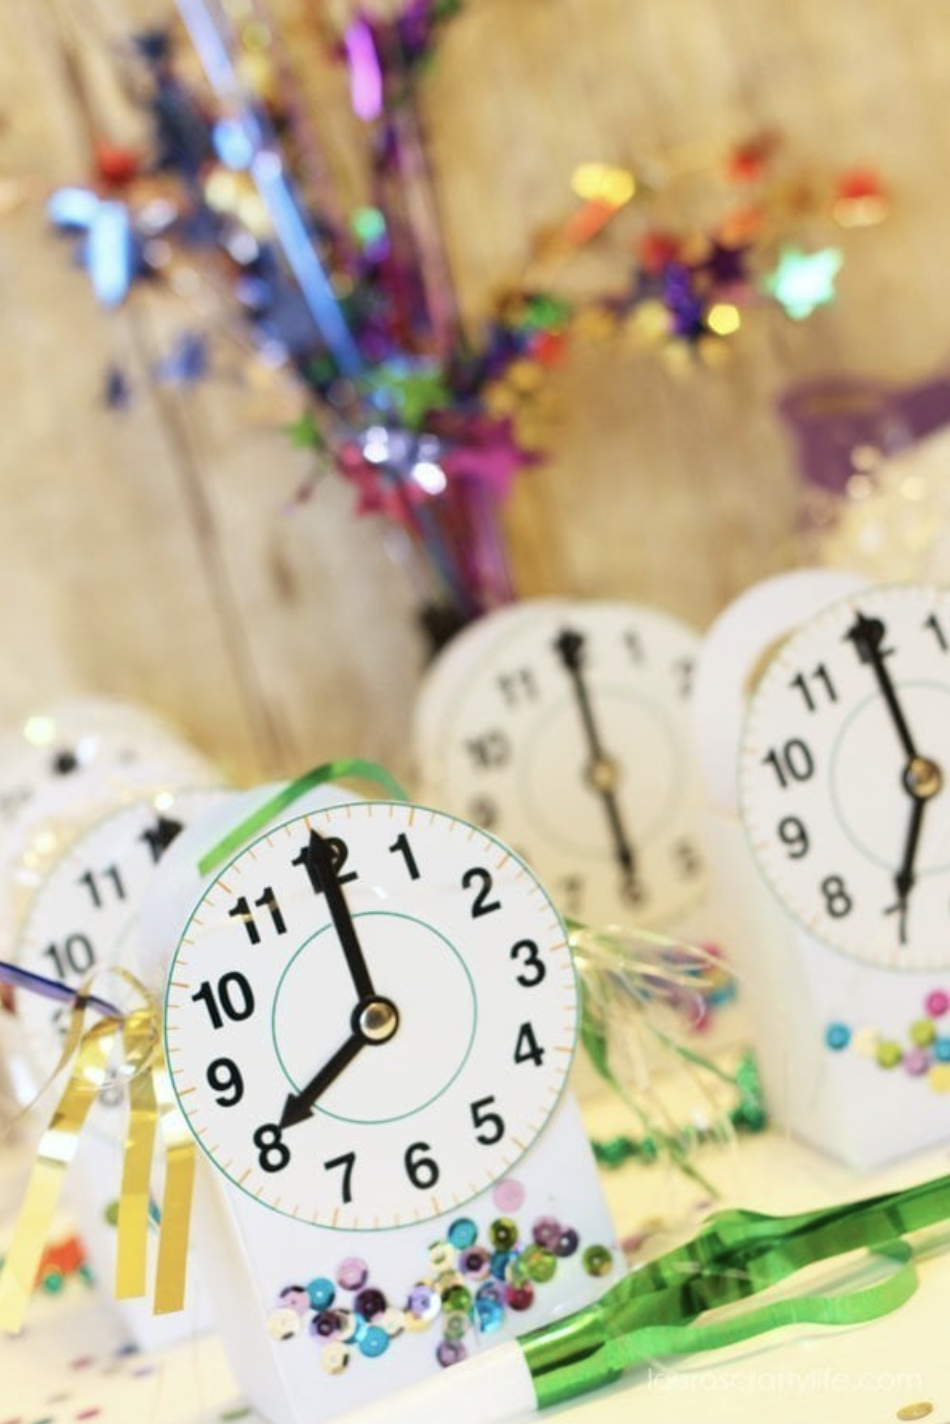 New Year's Eve countdown goods